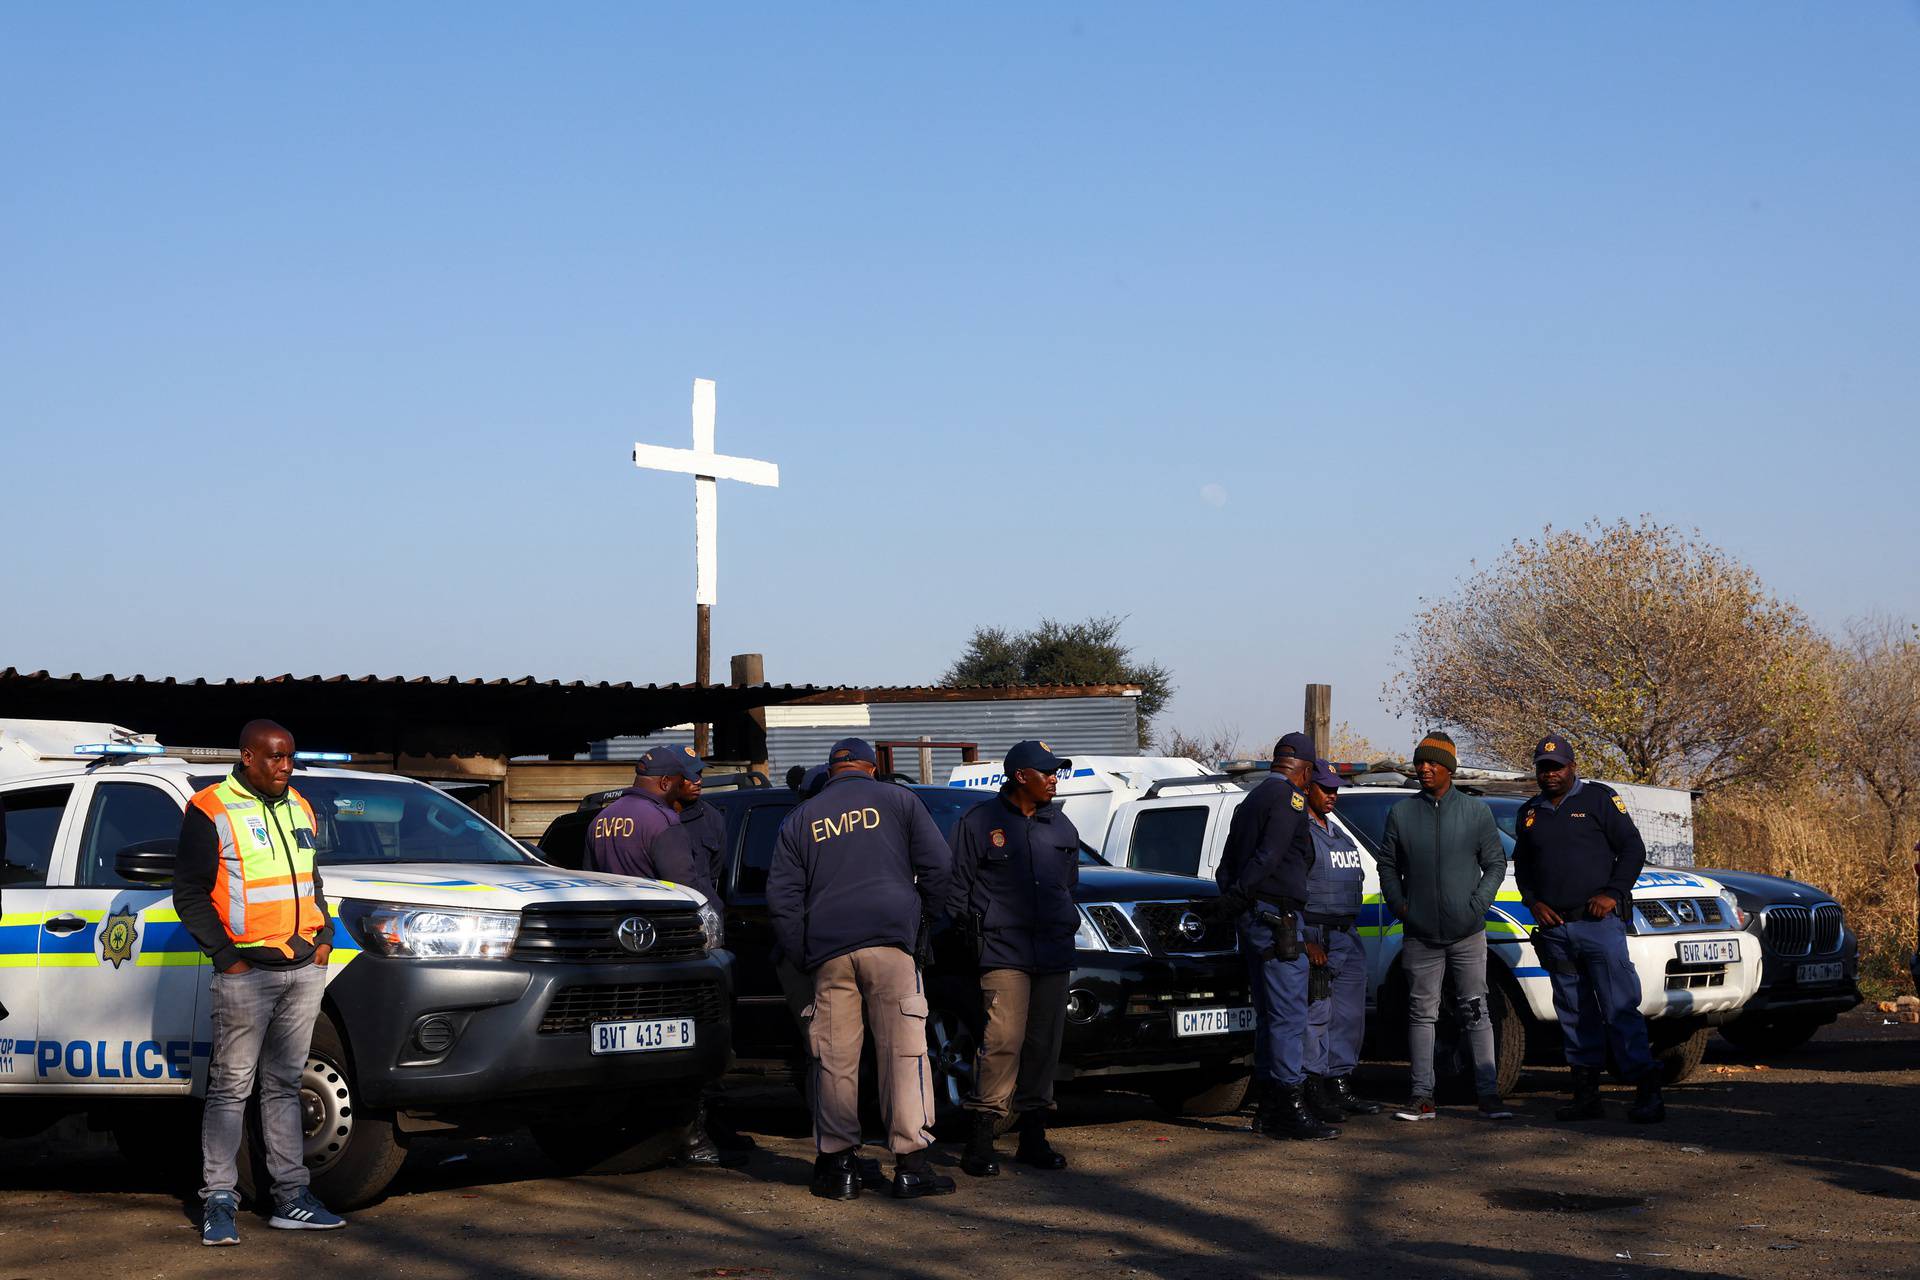 The scene of a suspected gas leak thought to be linked to illegal mining, near Boksburg